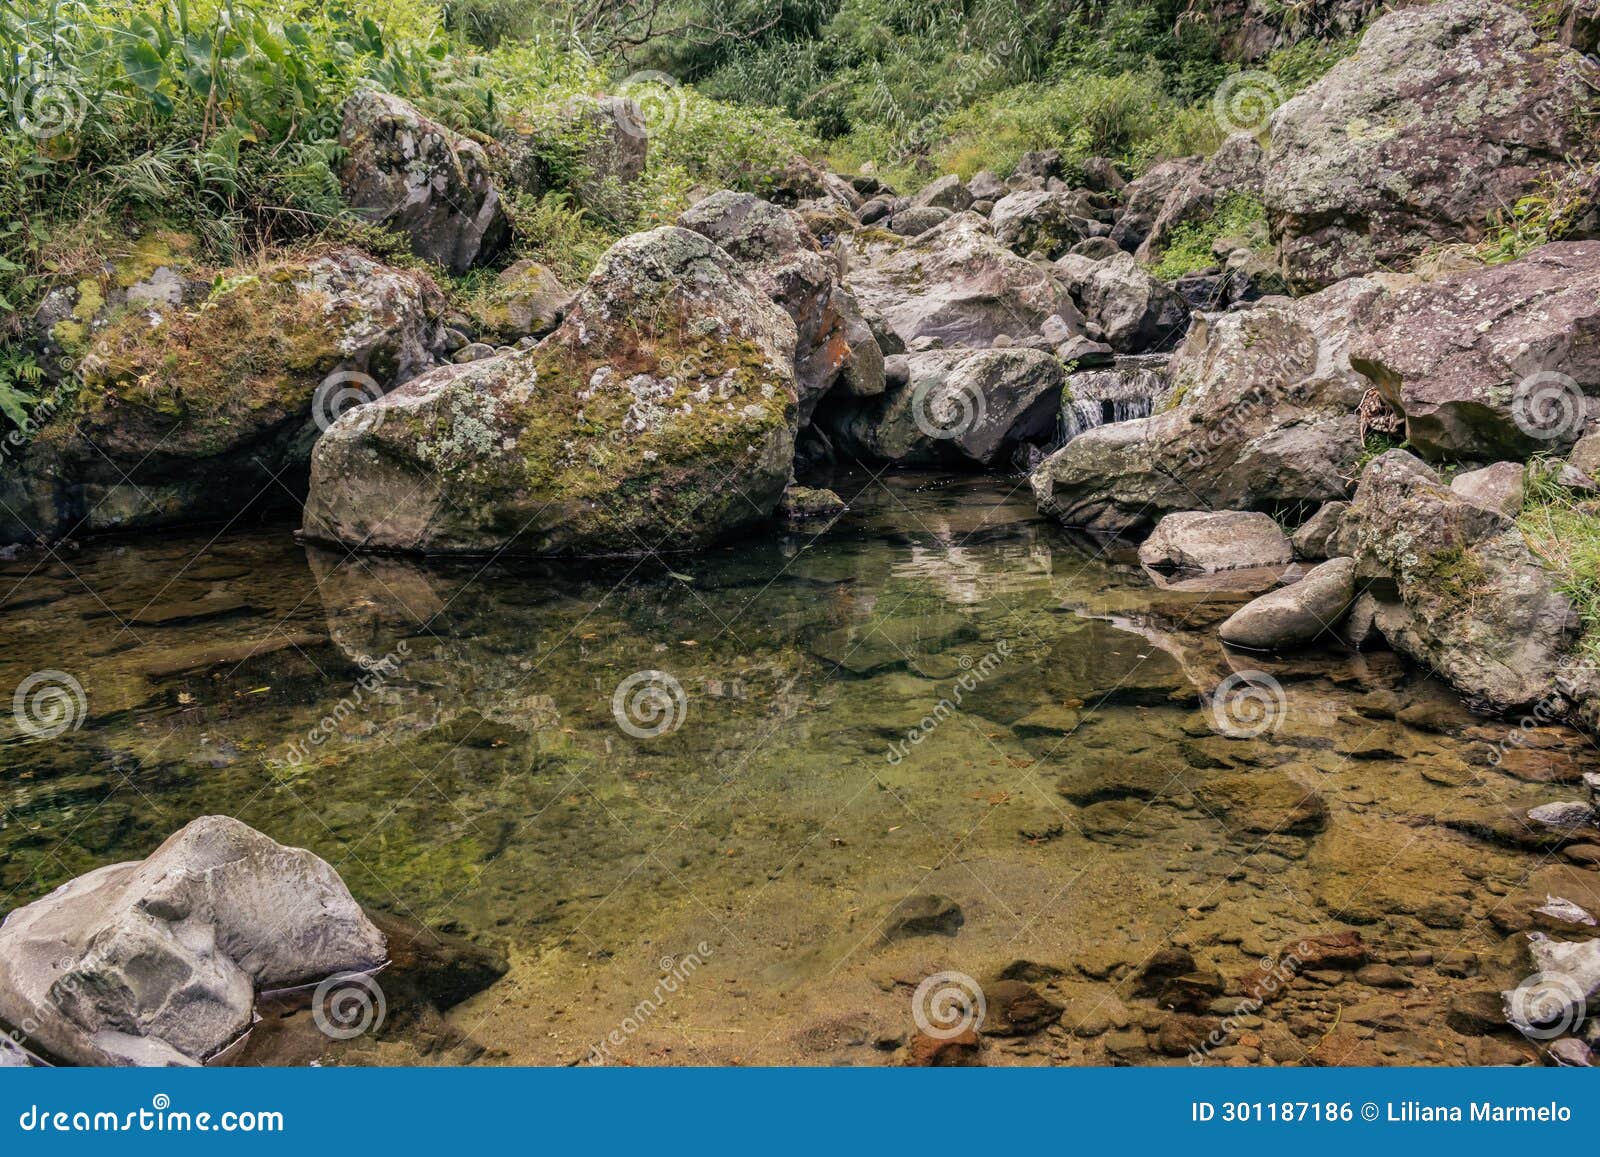 lake with clear water with rocks and vegetation in achadinha, sÃ£o miguel - azores portugal